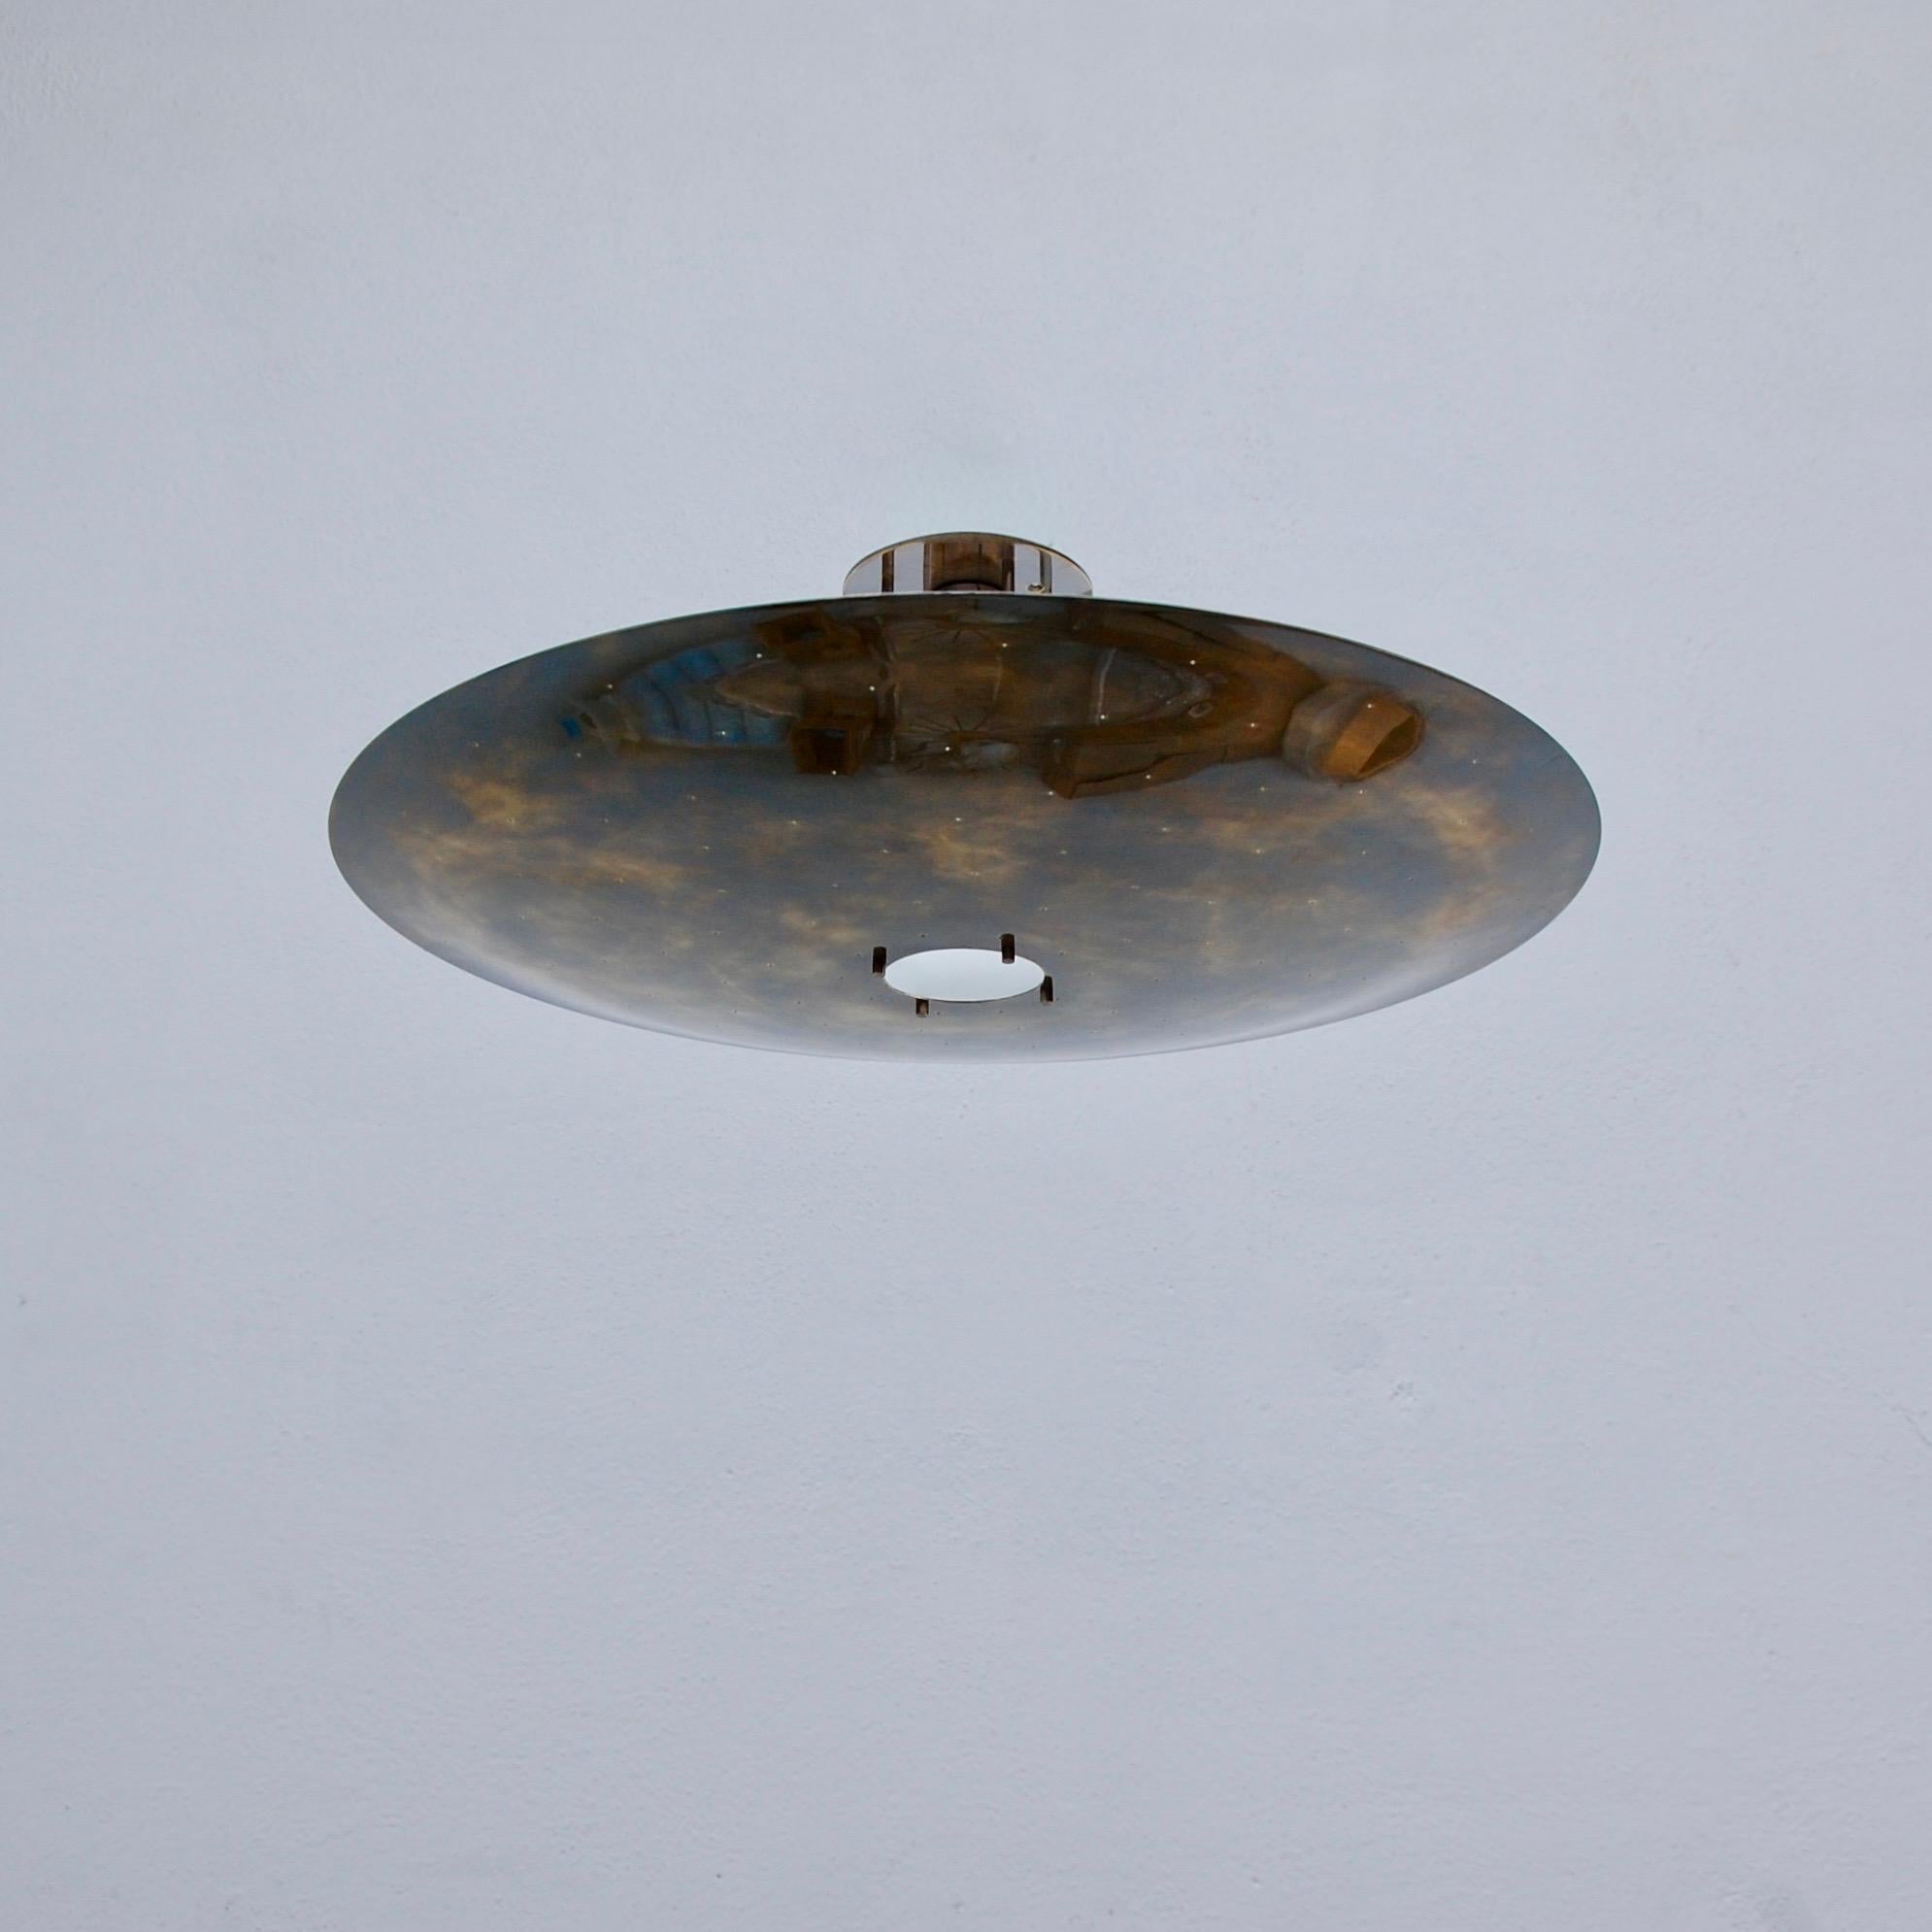 LUFO perforated brass dome ceiling light by Lumfardo Luminaires. Part of our contemporary collection the LUFO ceiling light is in a darkened patina finish. Hand perforations frame around a larger center hole with small glass diffuser to give both